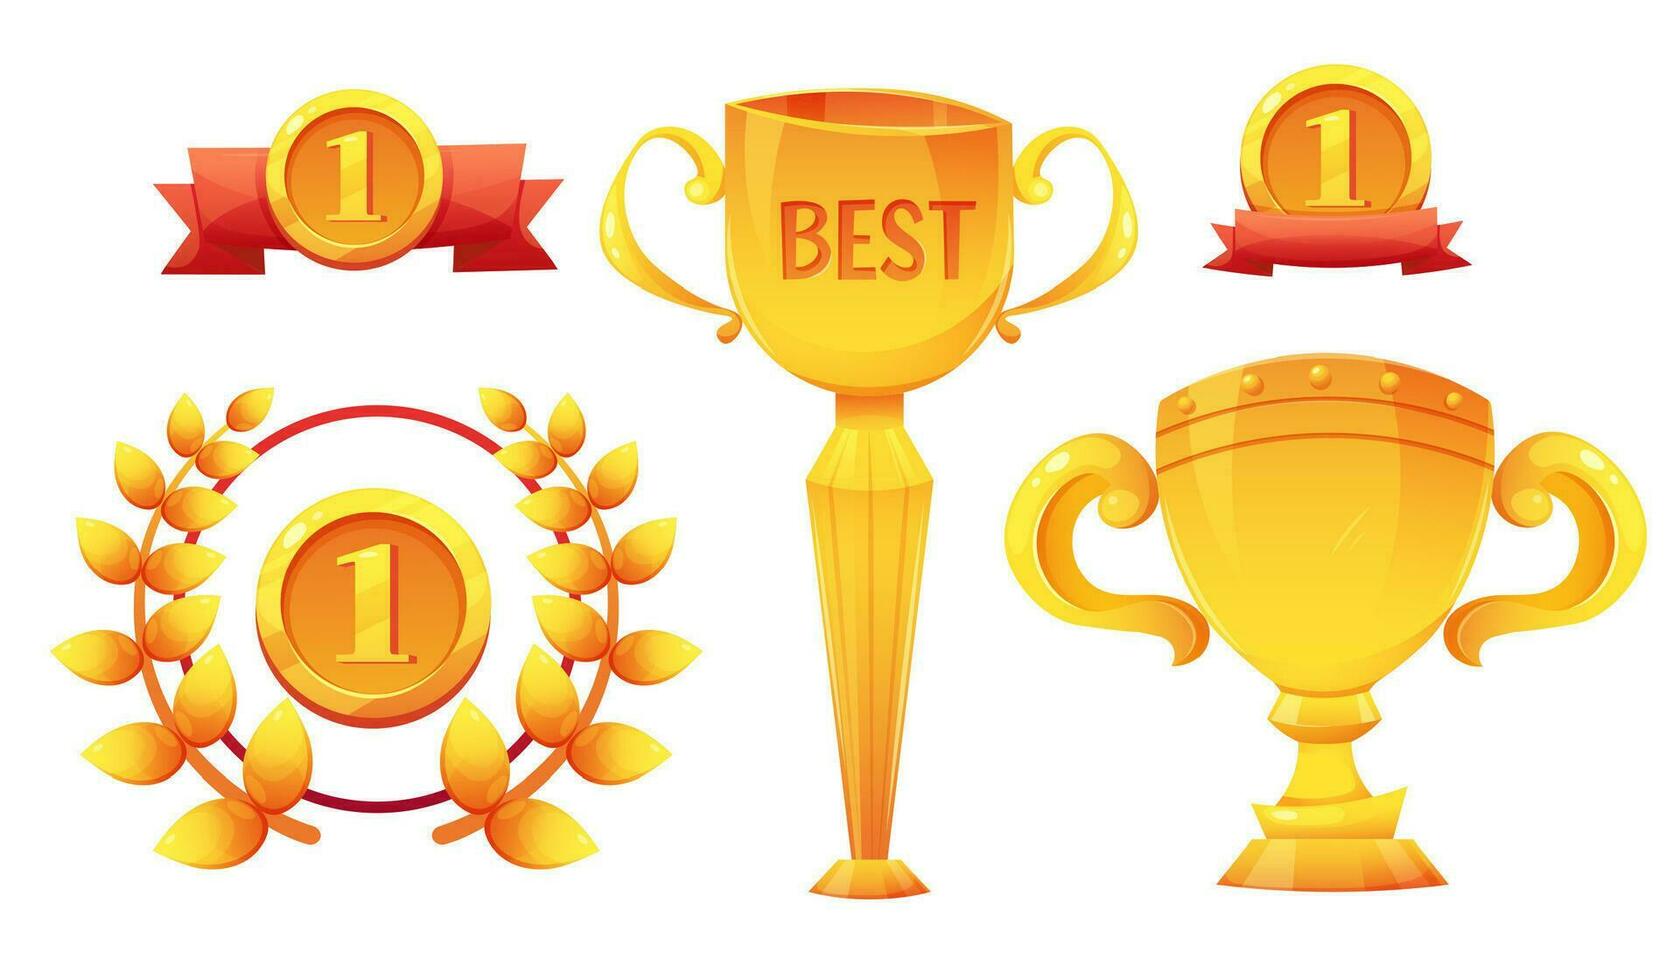 Set of gold awards for the winner. Gold medal with the number 1 and ribbons, with wreath of laurel leaves, gold cups. Vector illustration in cartoon style